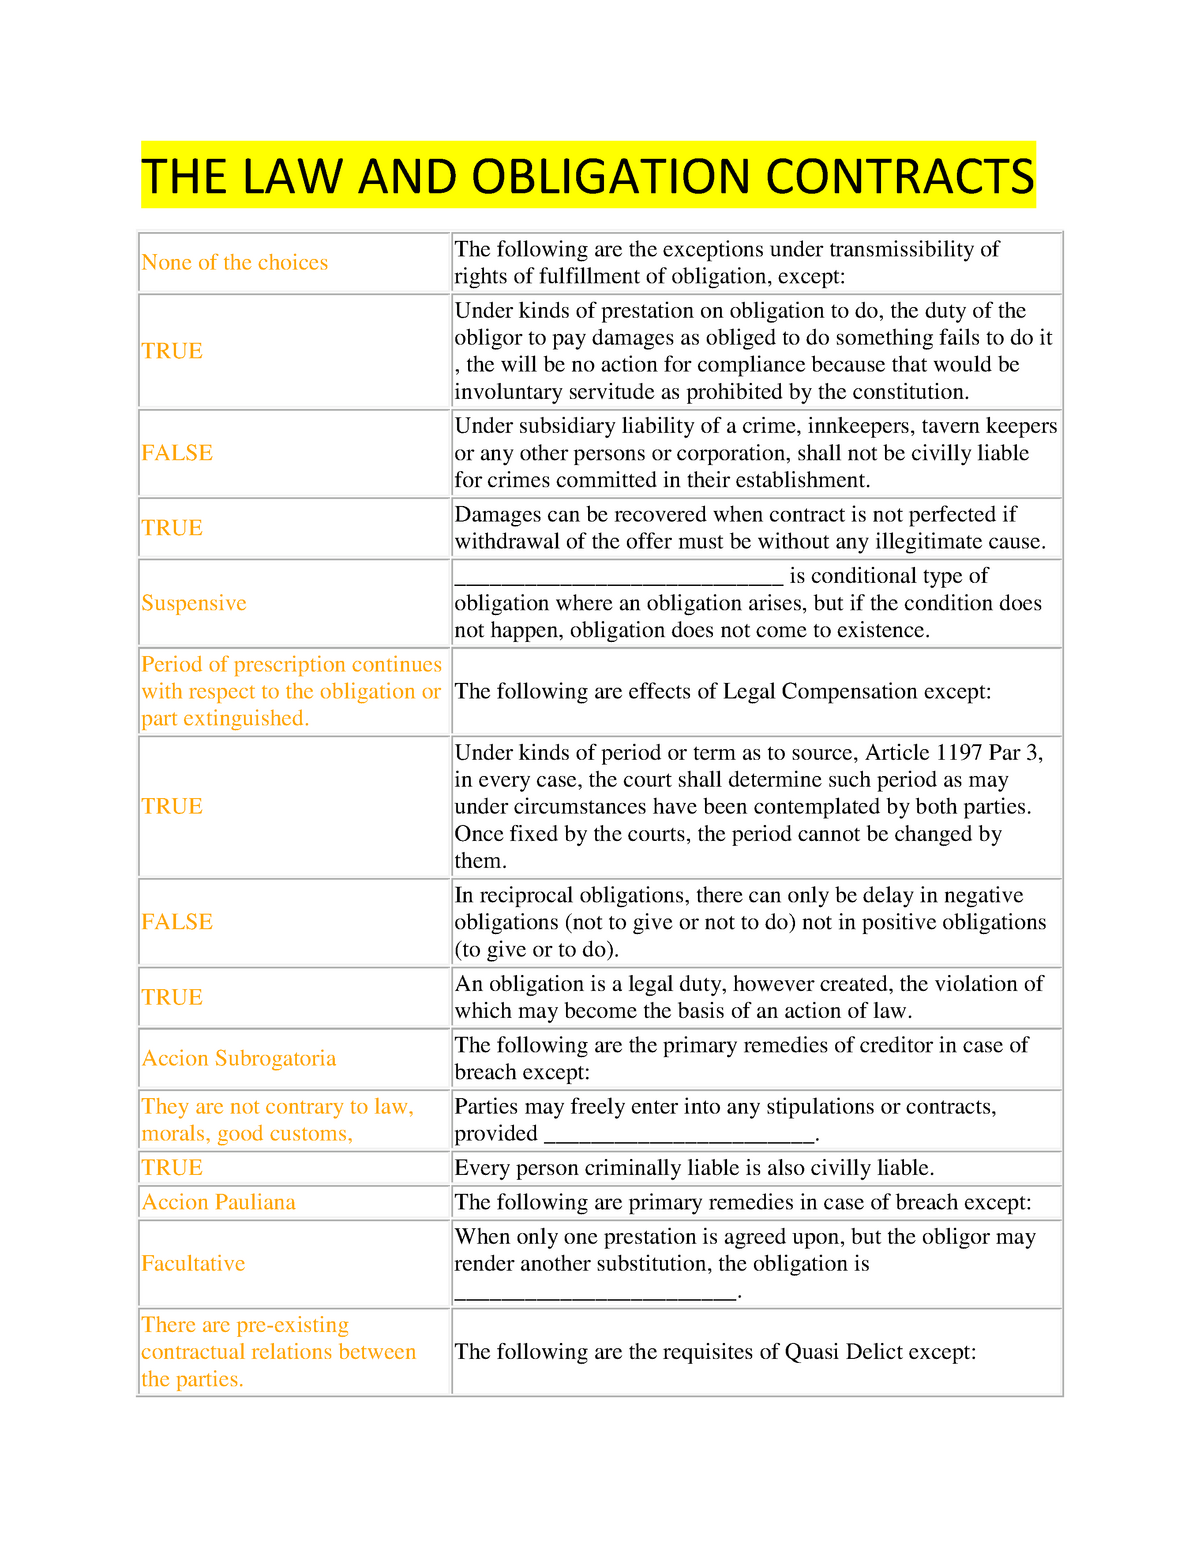 assignment of contracts under california law